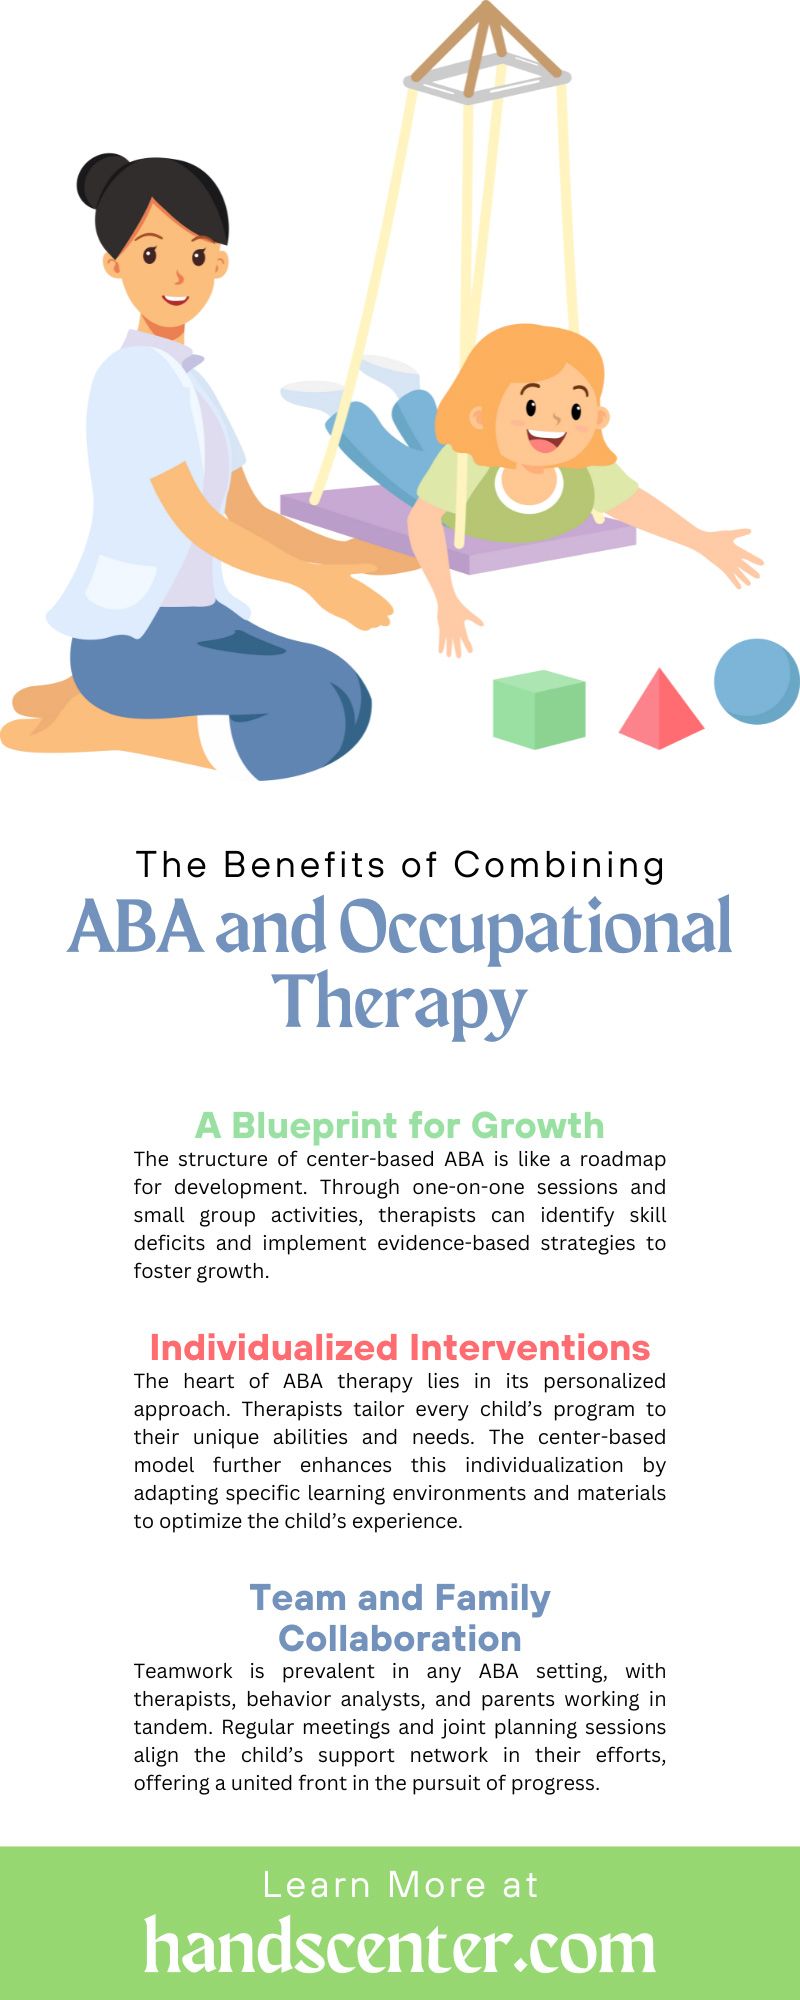 The Benefits of Combining ABA and Occupational Therapy